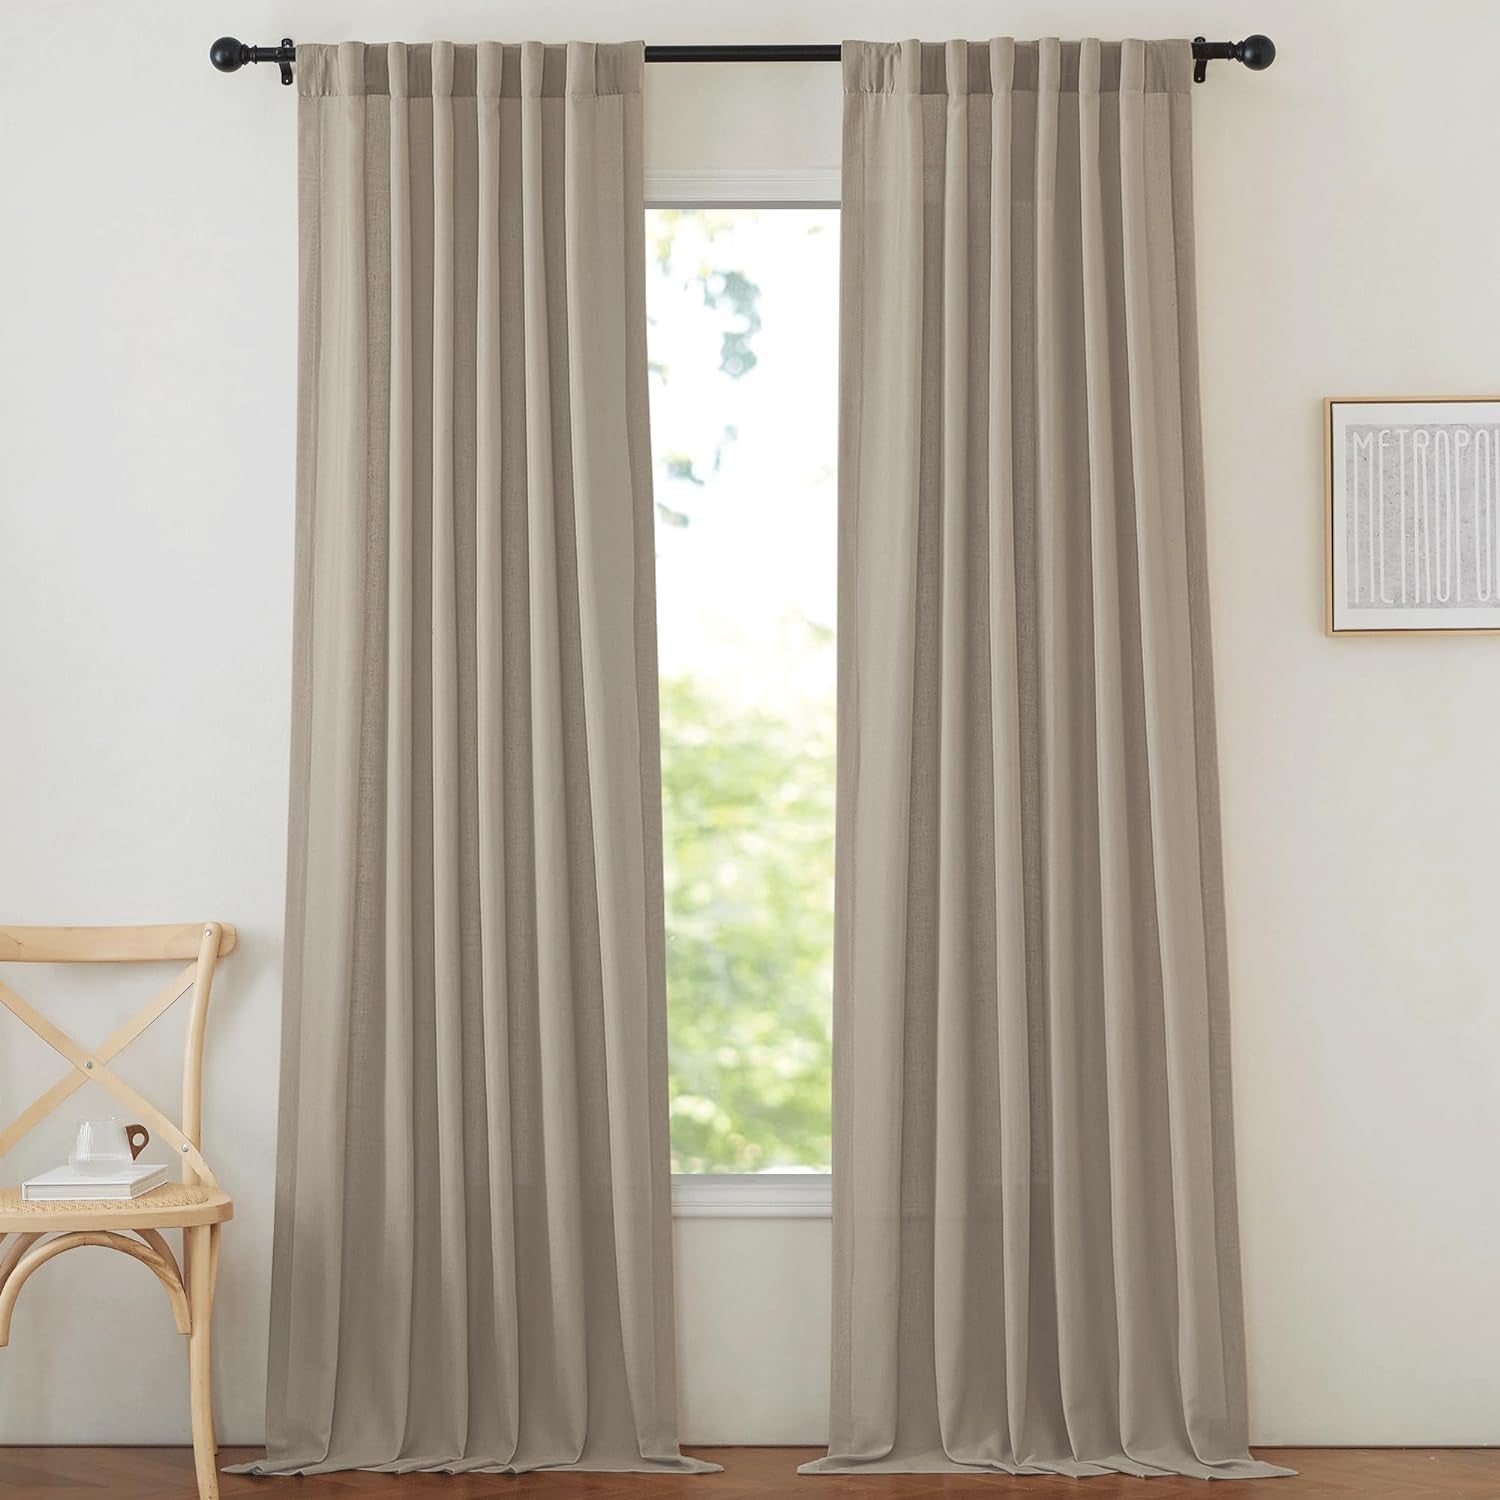 NICETOWN Taupe Thick Linen Curtains 96 Inches Long, Pinch Pleated Flax Linen Curtains Privacy Added Window Treatments with Light Filtering Drapes for Bedroom/Living Room, W50 X L96, 2 Panels  NICETOWN   